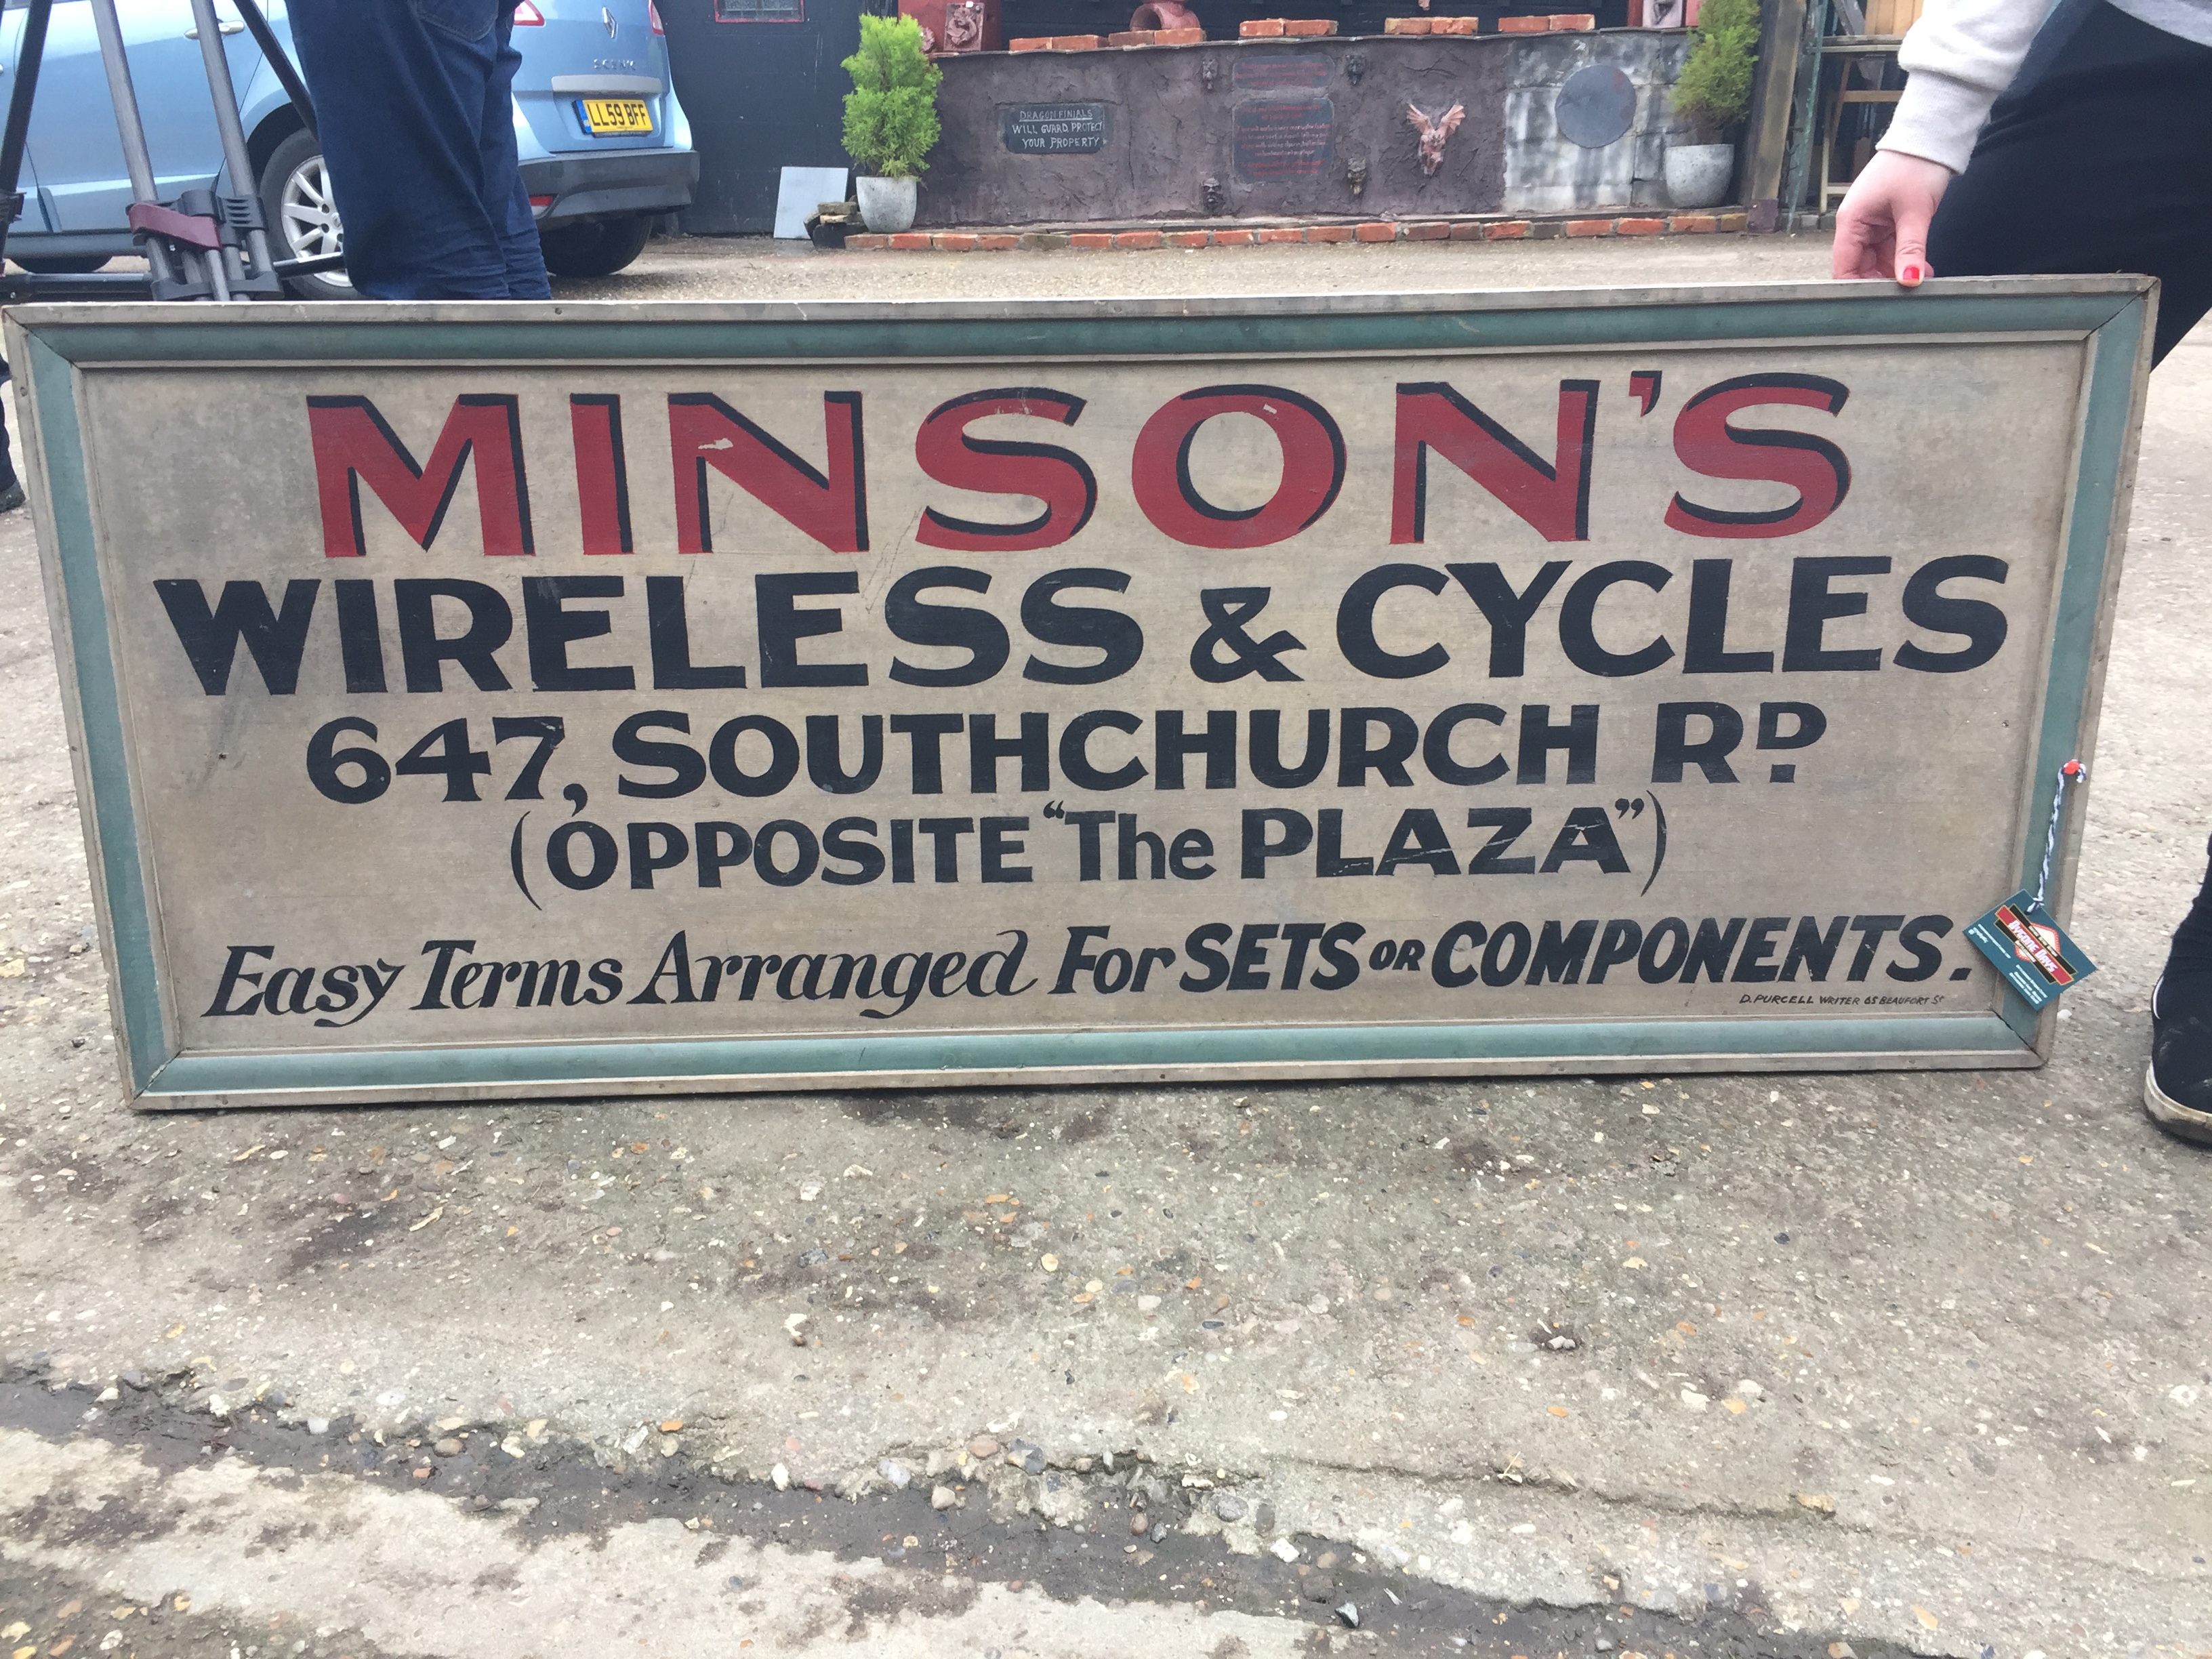 A 1950'S DOUBLE SIDED PAINTED WOODEN SIGN FOR "MINSONS" WIRELESS AND CYCLE SHOP